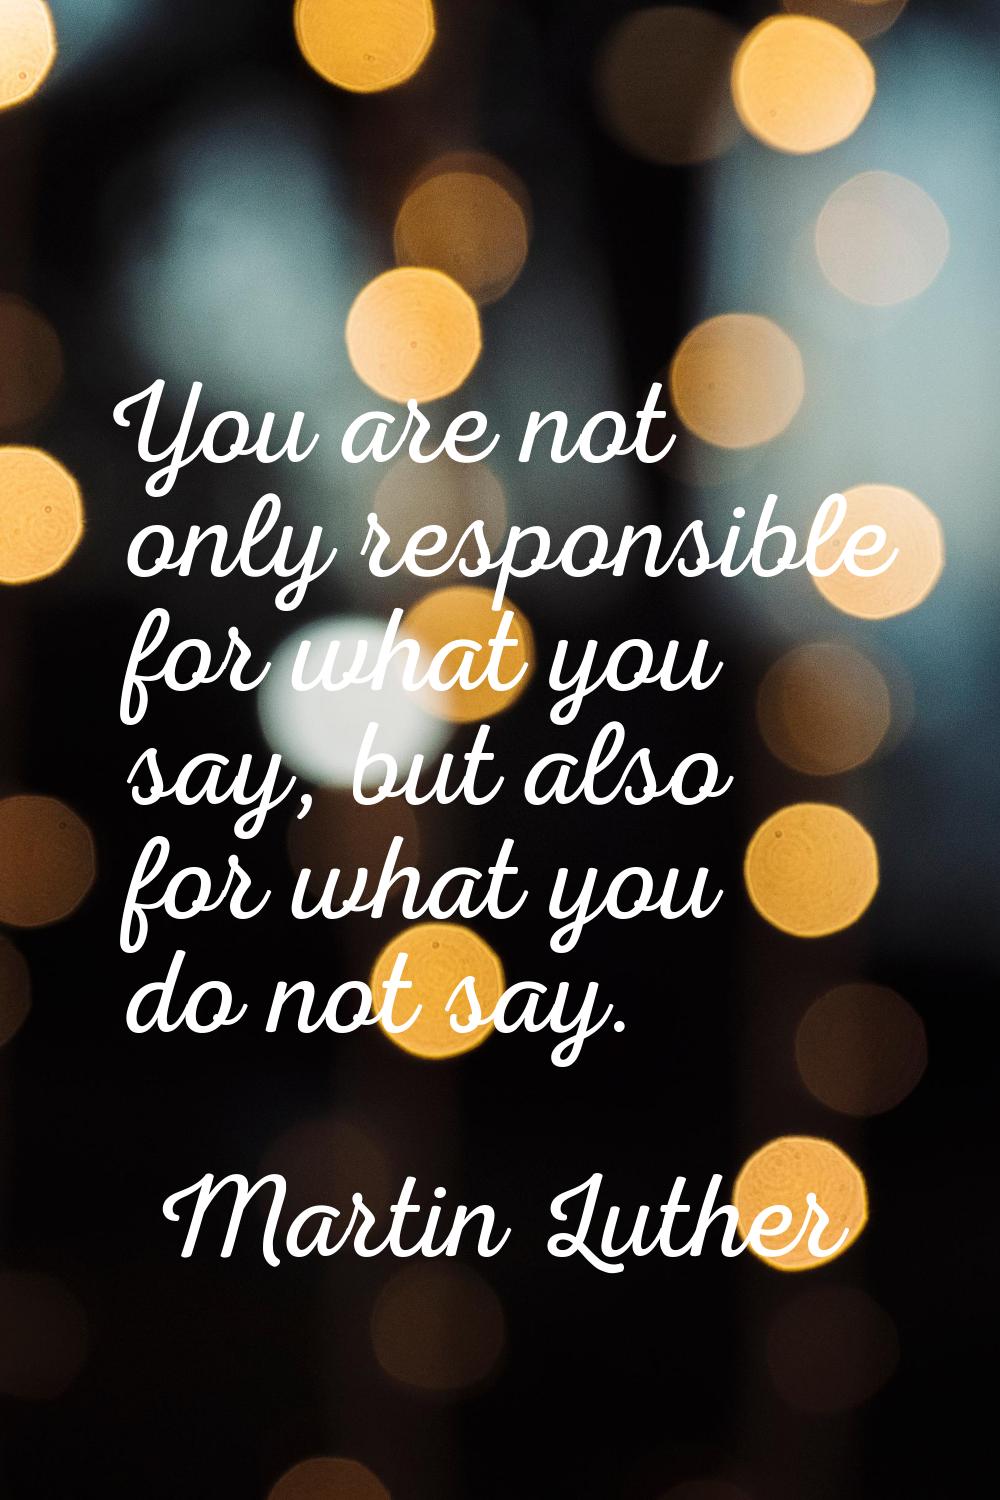 You are not only responsible for what you say, but also for what you do not say.